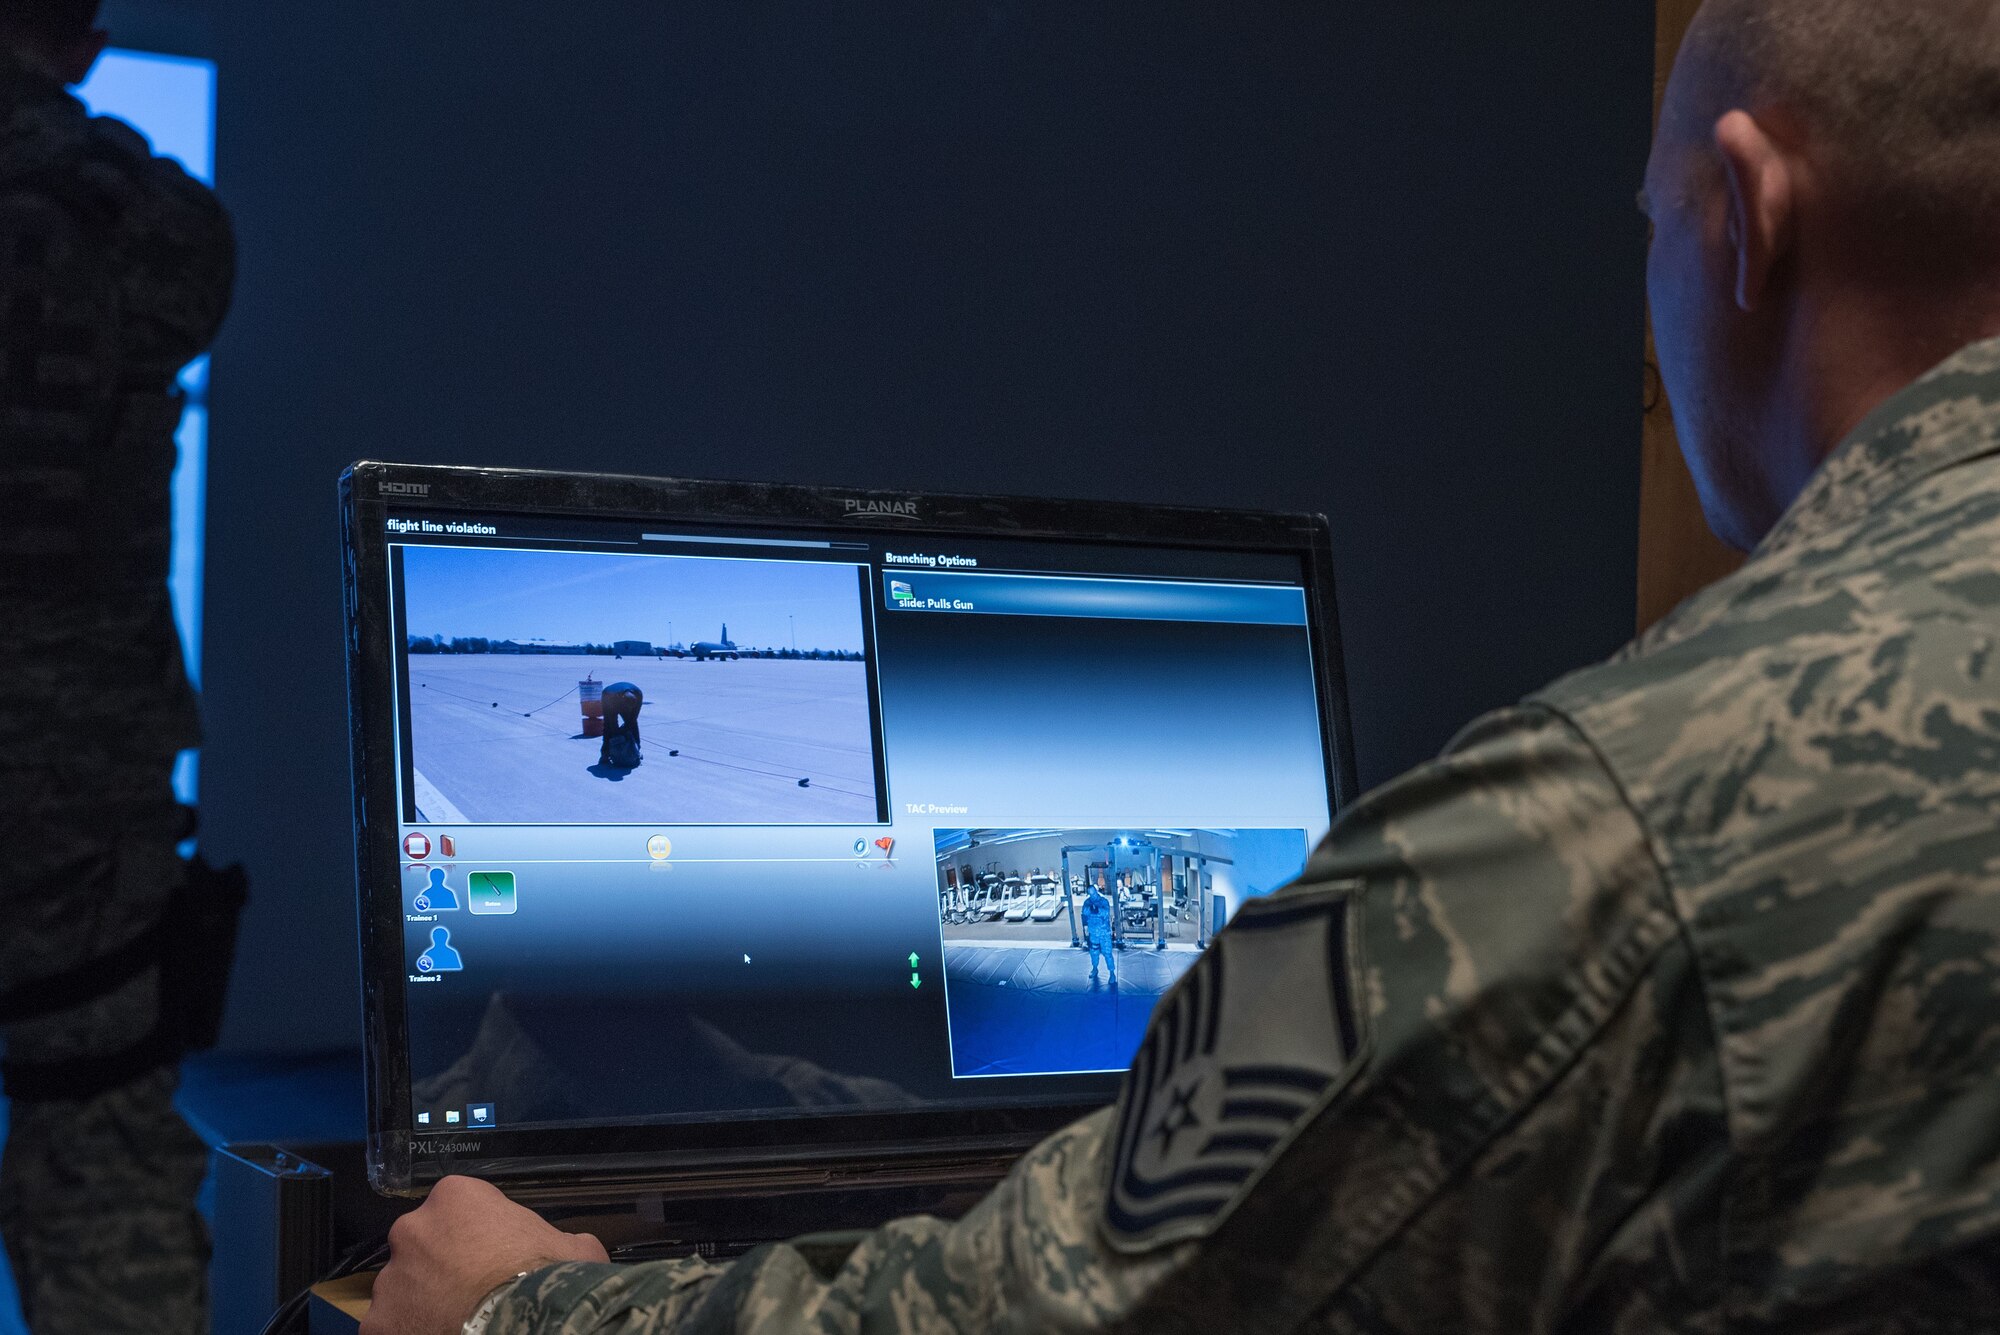 Master Sgt. Theodore Hemmah, a training manager for the 934th Security Forces Squadron, monitors fire team members as they participate in a scenario on the Multiple Interactive Learning Objectives simulator at the Minneapolis-St. Paul Air Reserve Station, Minn. on Dec. 14, 2017. The system includes software that allows instructors to create fully interactive video scenarios suited to their local missions. (U.S. Air Force photo by Master Sgt. Eric Amidon)